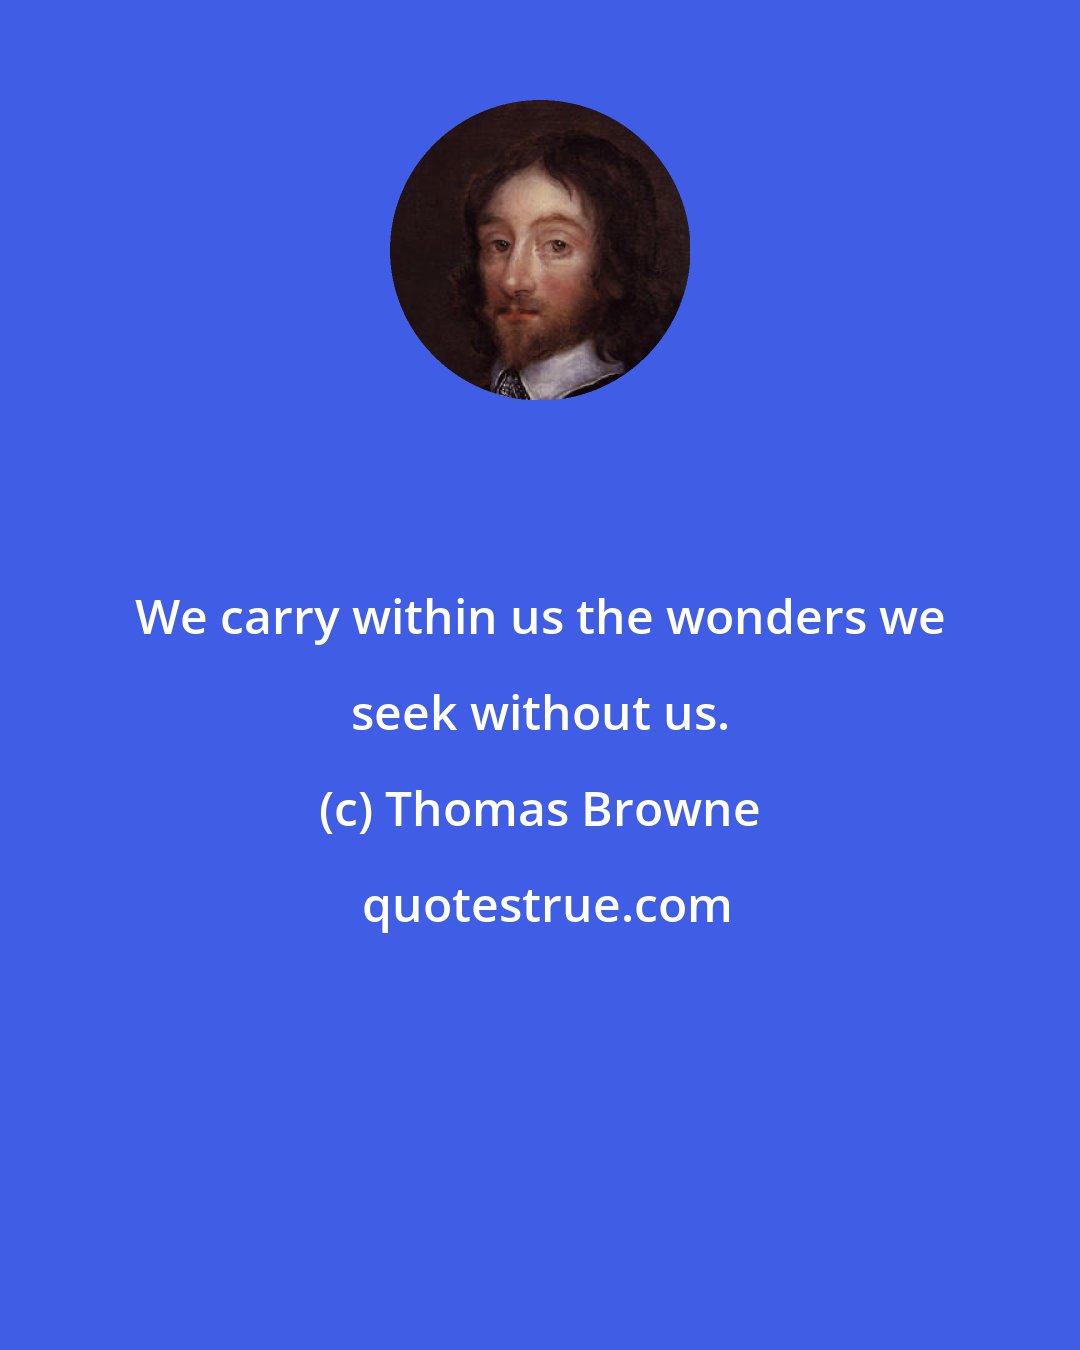 Thomas Browne: We carry within us the wonders we seek without us.